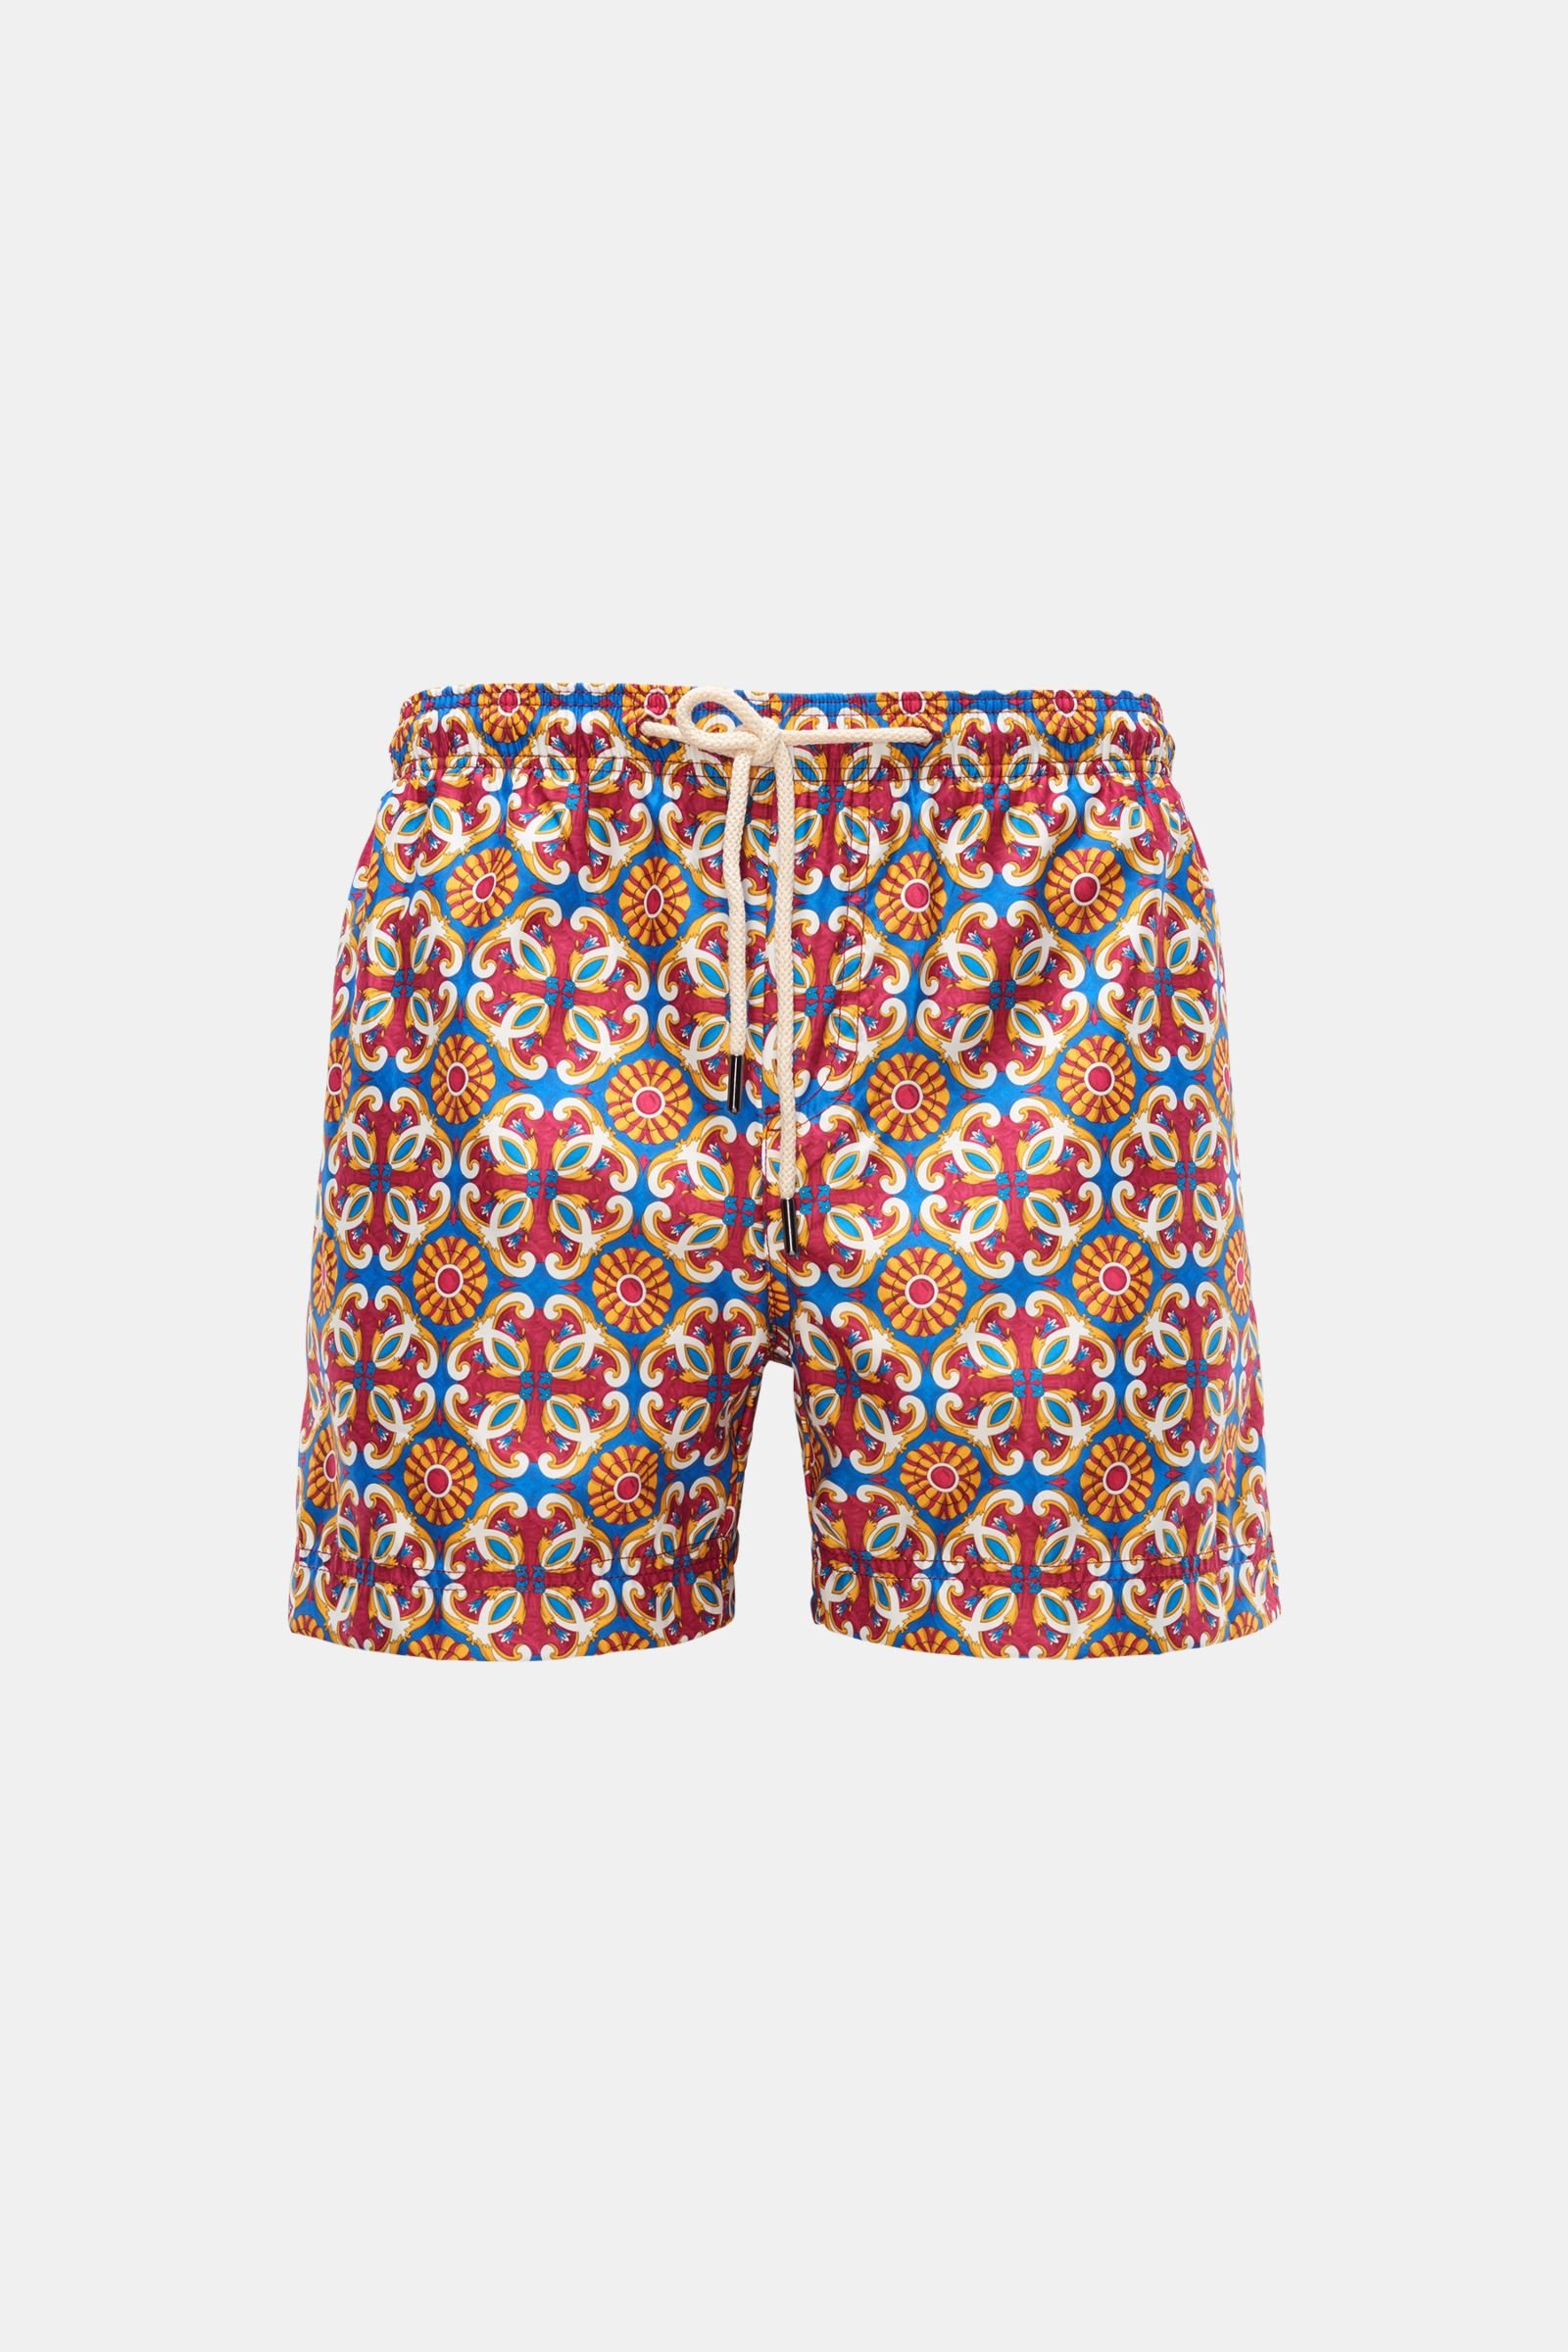 Swim shorts blue/red/yellow patterned 